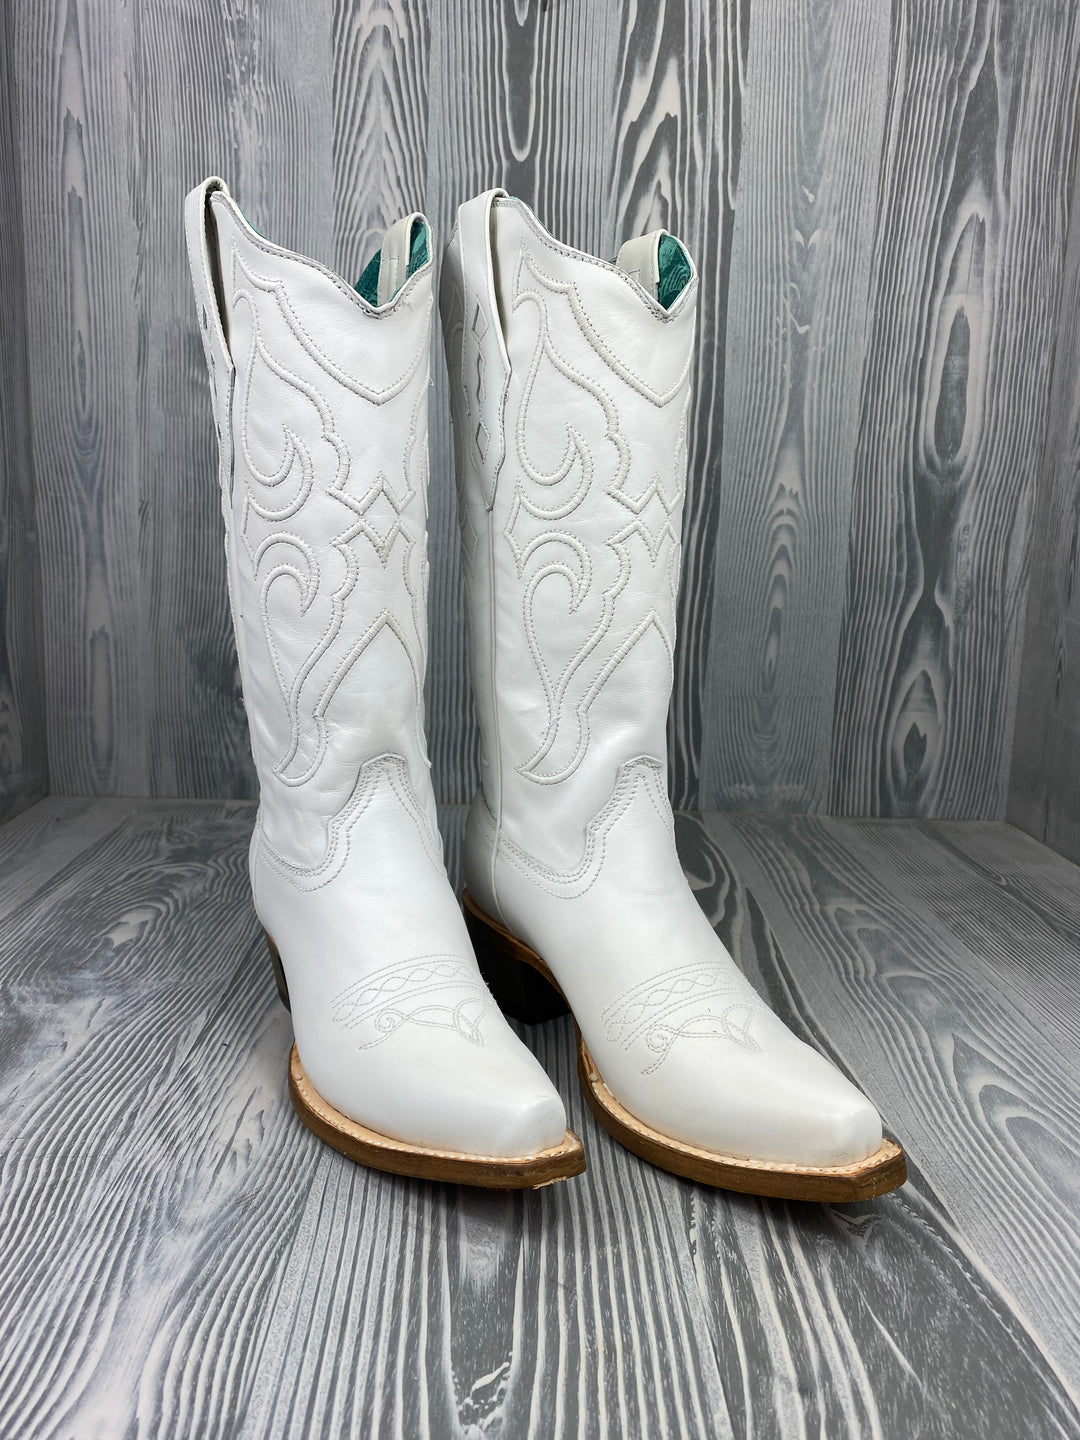 Bottes western Corral All White Cowgirl pour femmes - Z5046